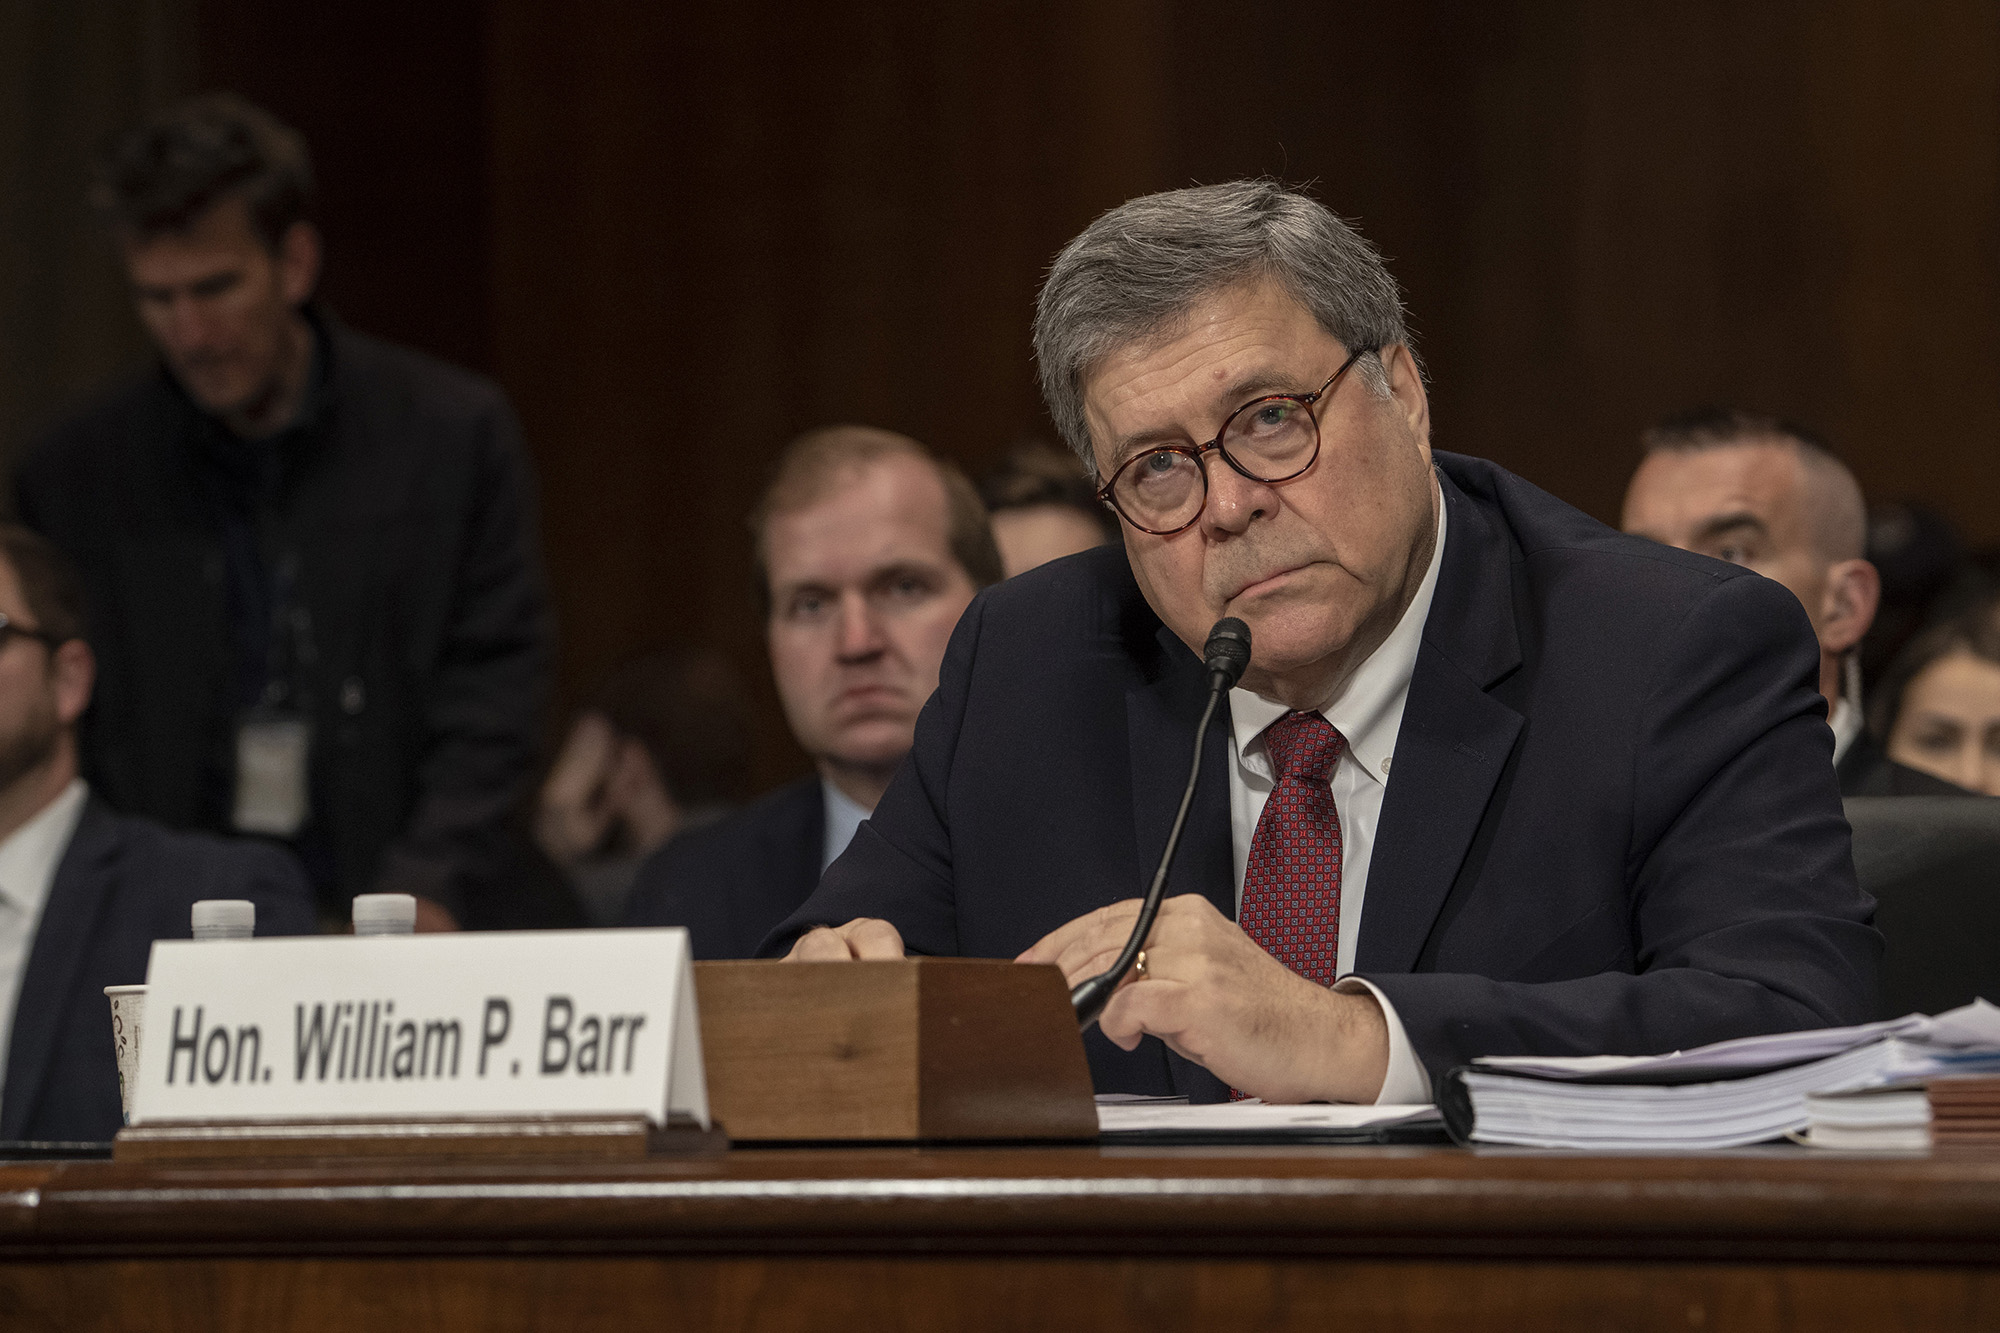 The truth had set us free, well, until Barr was sworn in